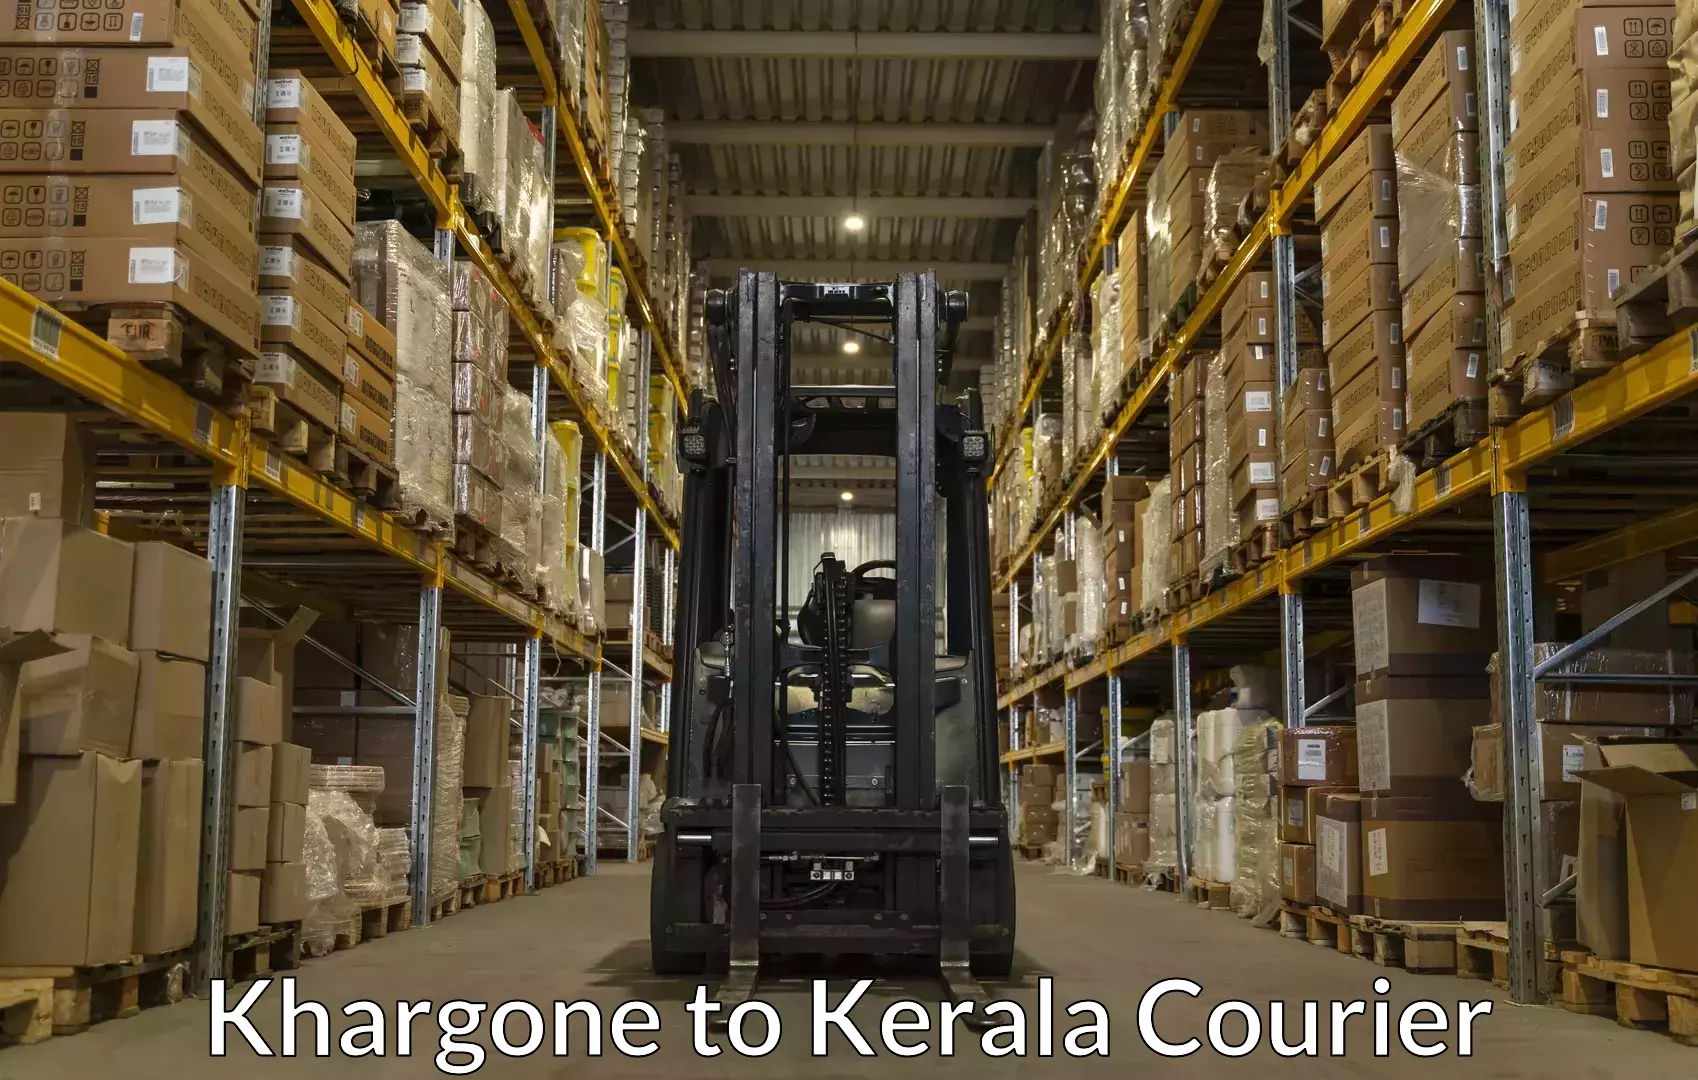 Luggage delivery network Khargone to Cochin Port Kochi